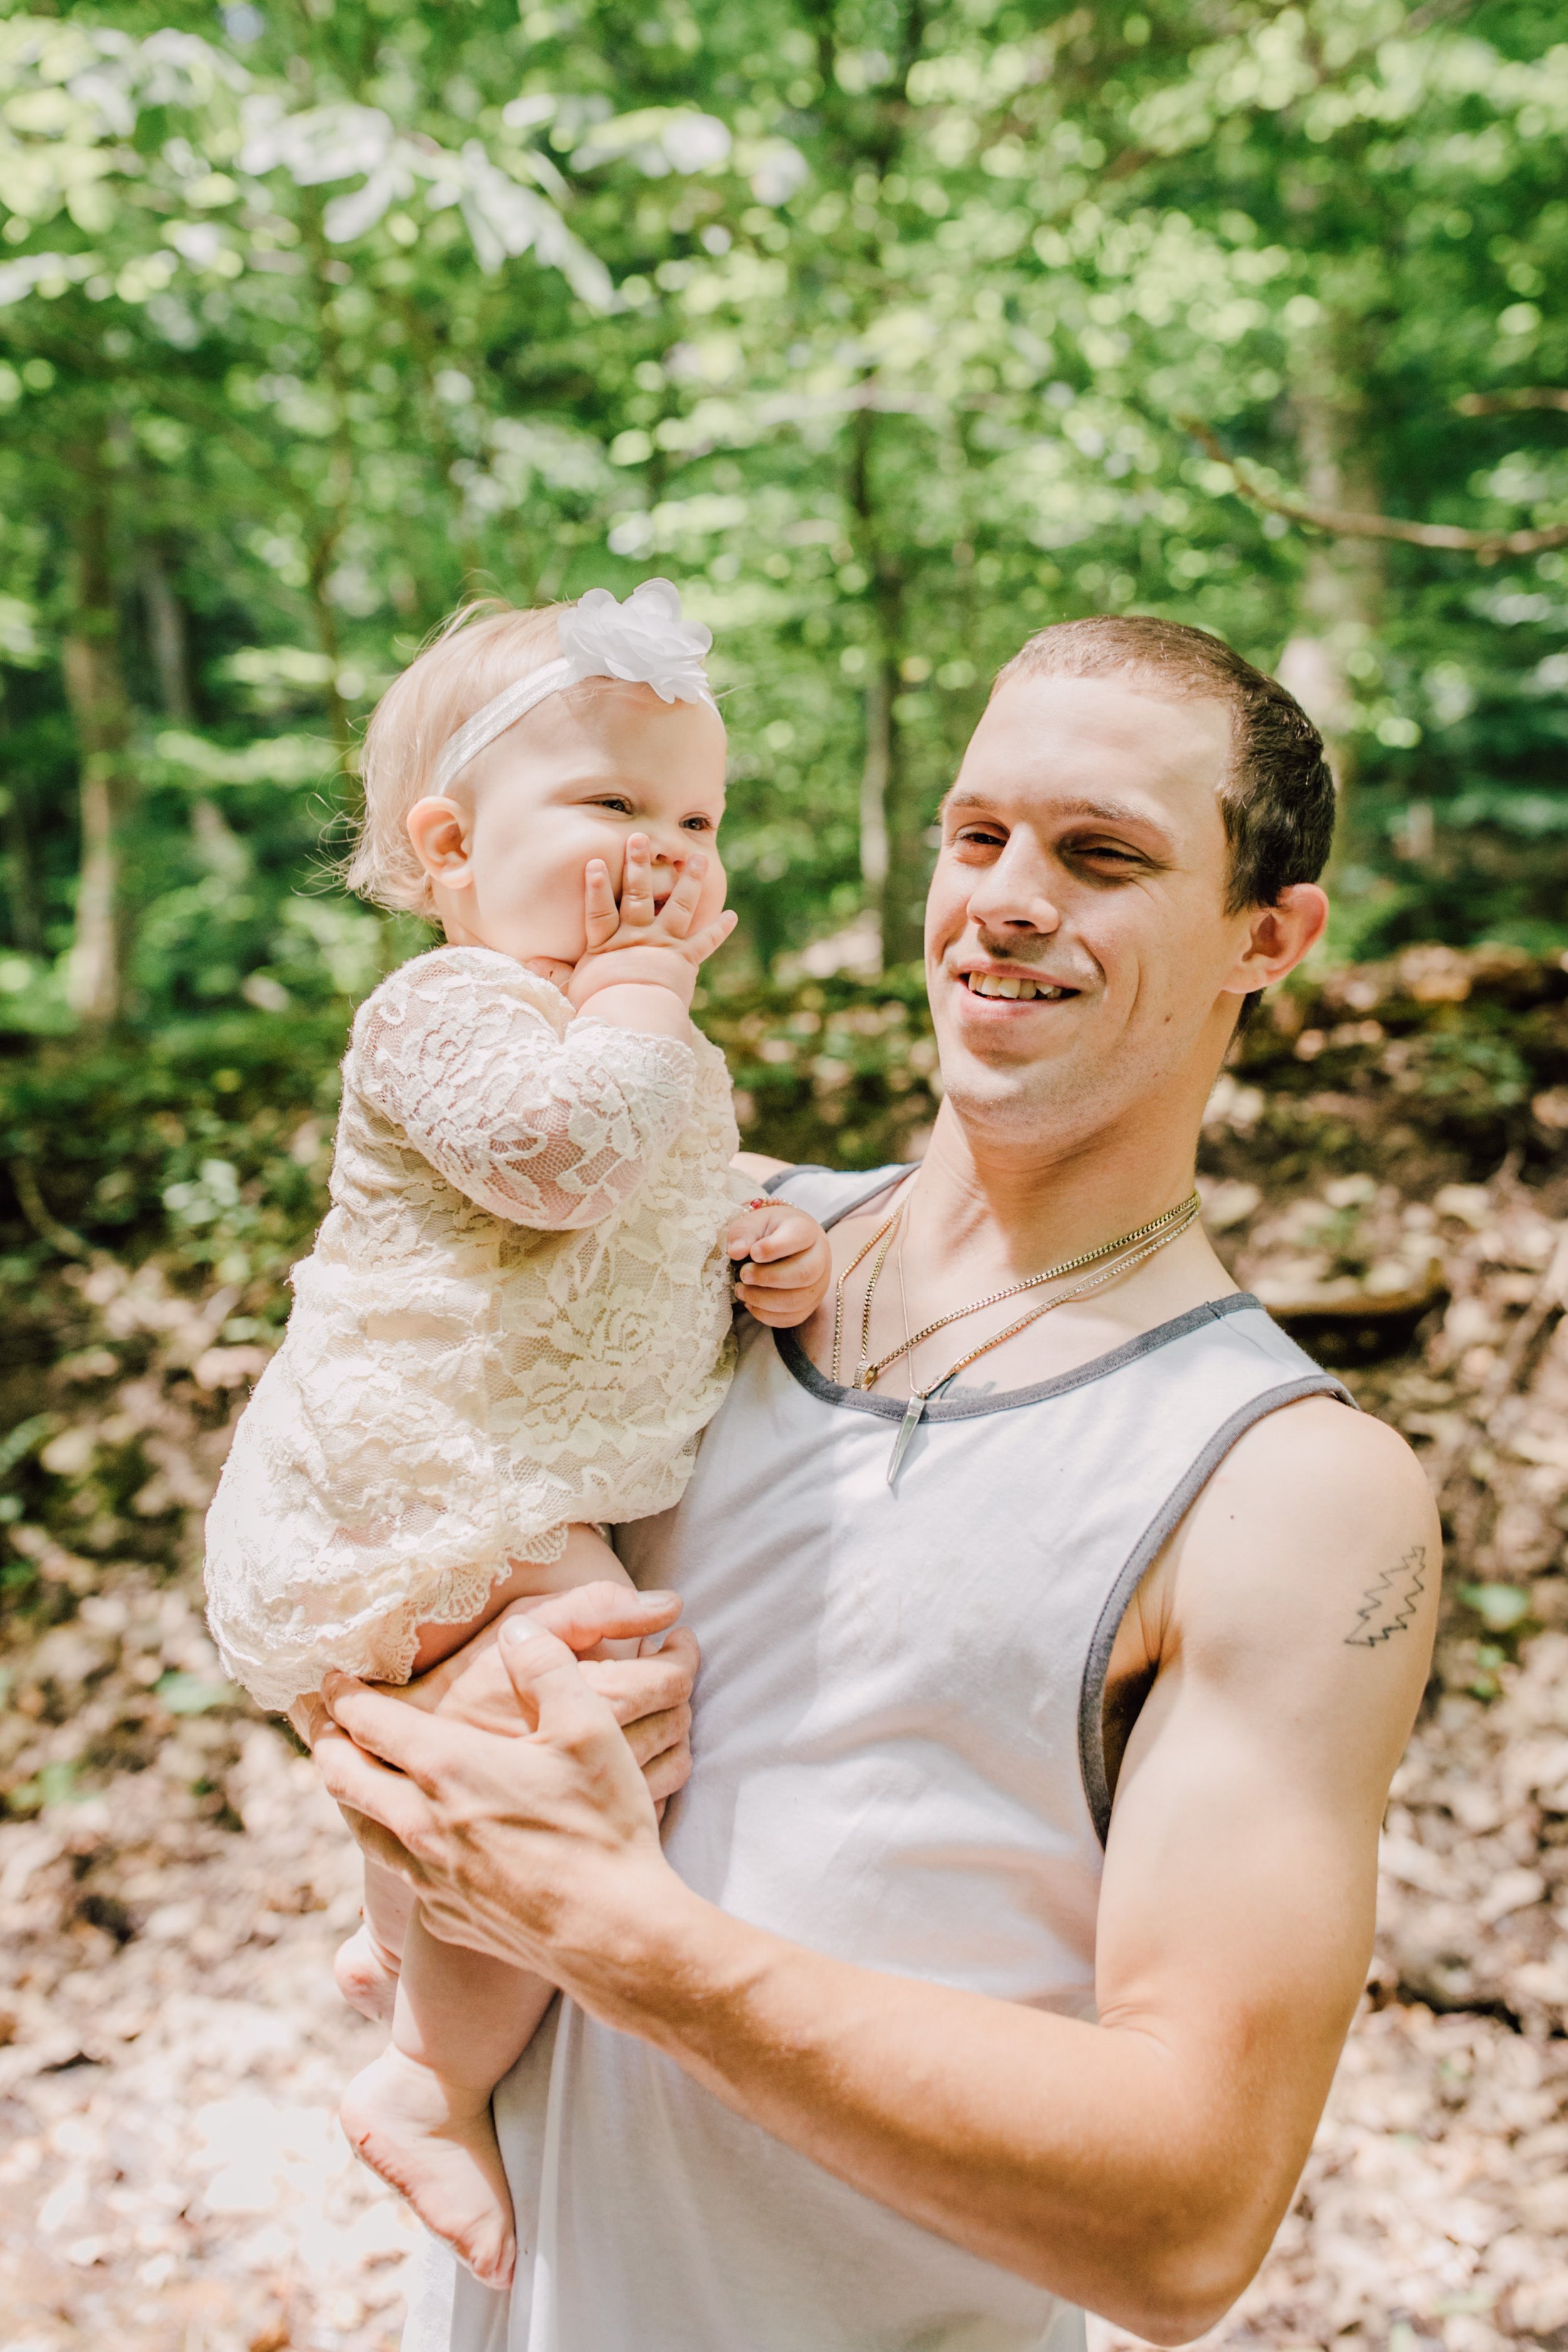  Dad holds his toddler as they smile during an adventure photoshoot&nbsp; 